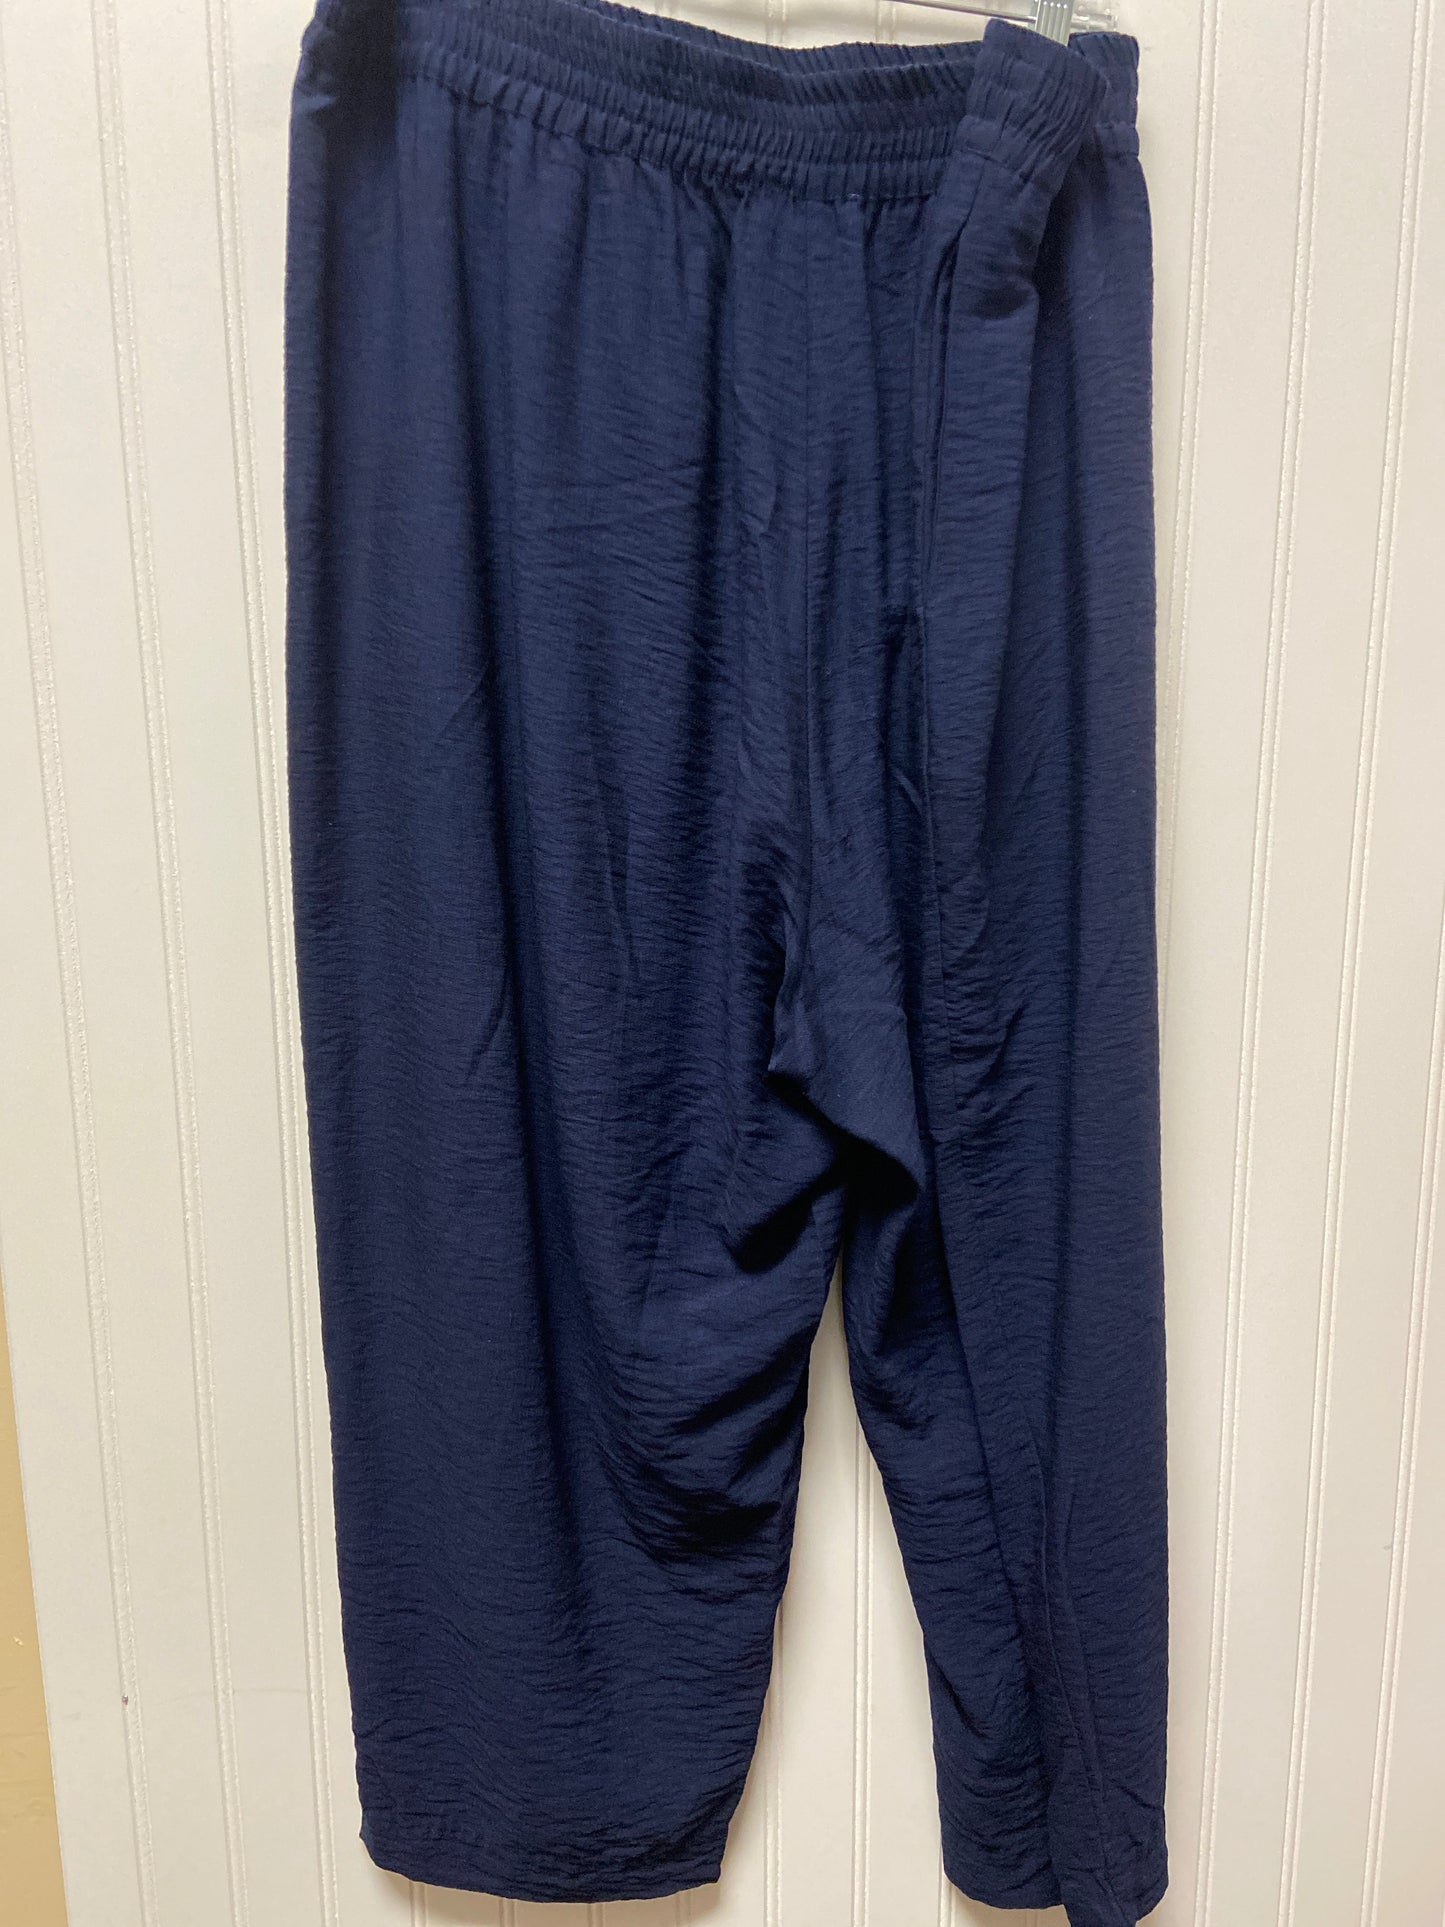 Pants Ankle By Vince Camuto  Size: 26